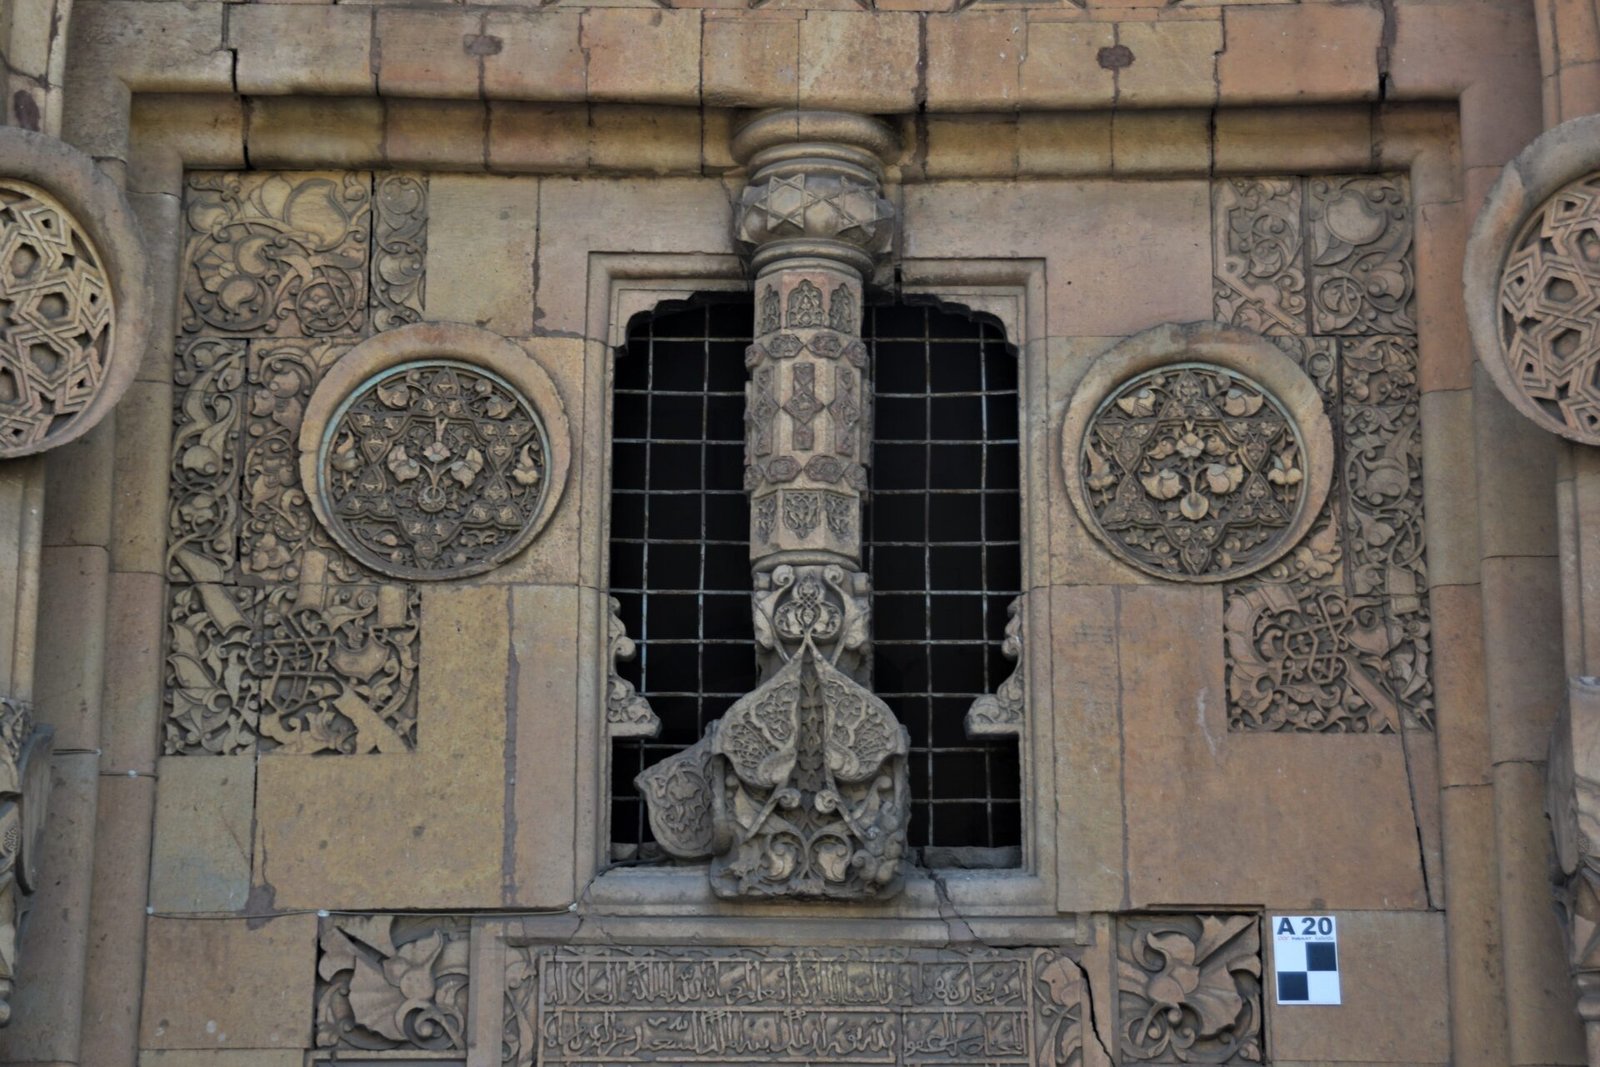 richly ornamented stone column in front of a small window adorning the main gate of a Seljuk hospital in Divrigi